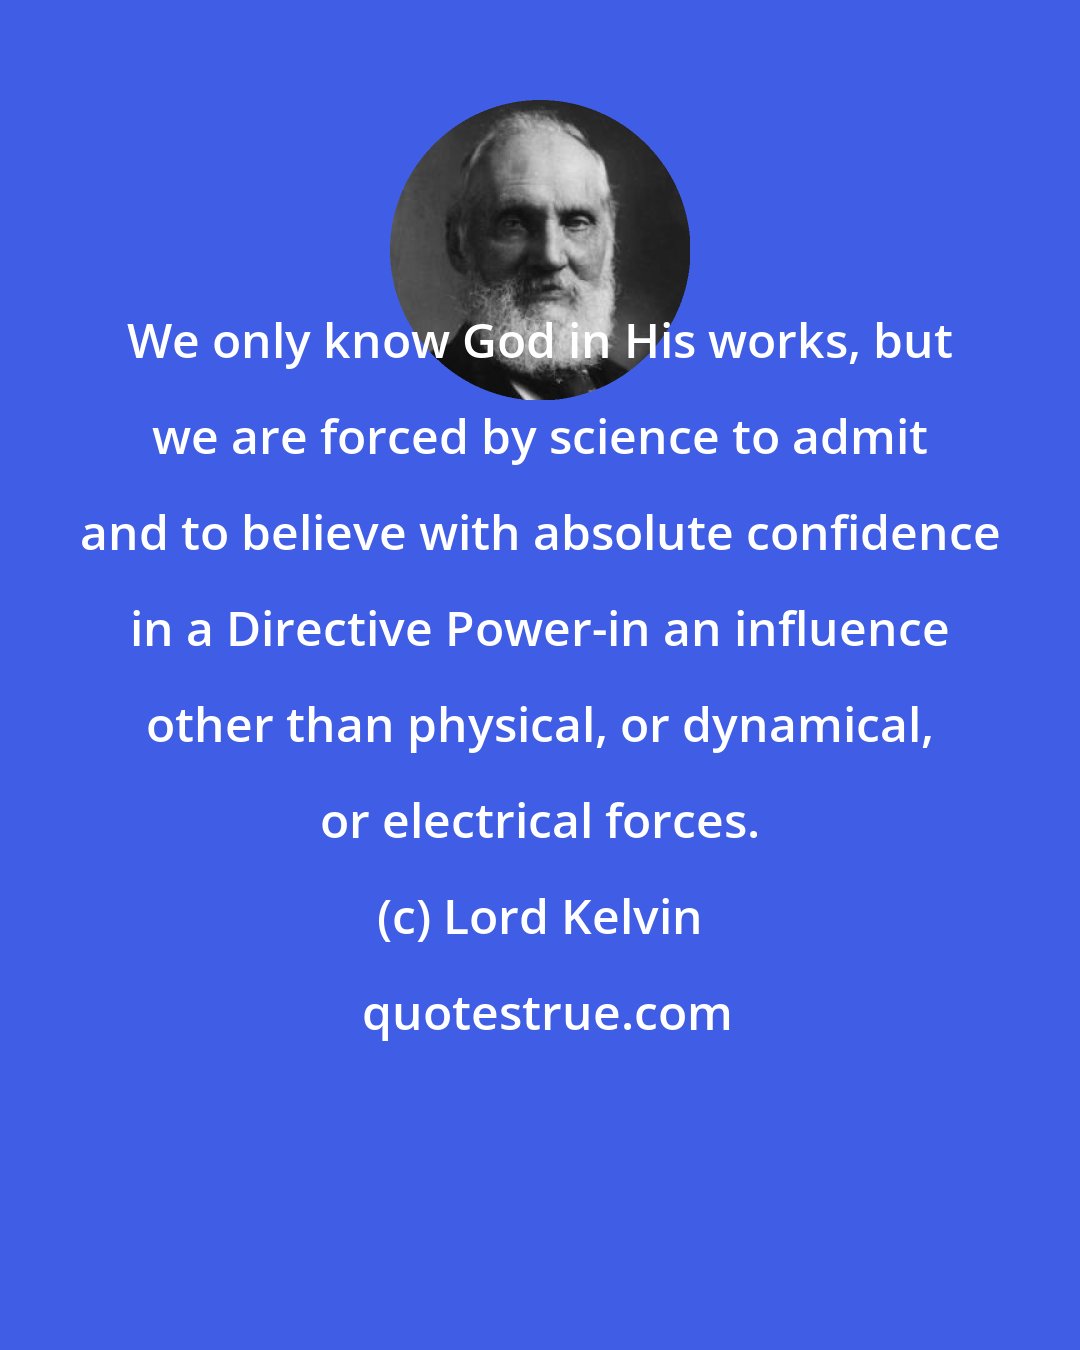 Lord Kelvin: We only know God in His works, but we are forced by science to admit and to believe with absolute confidence in a Directive Power-in an influence other than physical, or dynamical, or electrical forces.